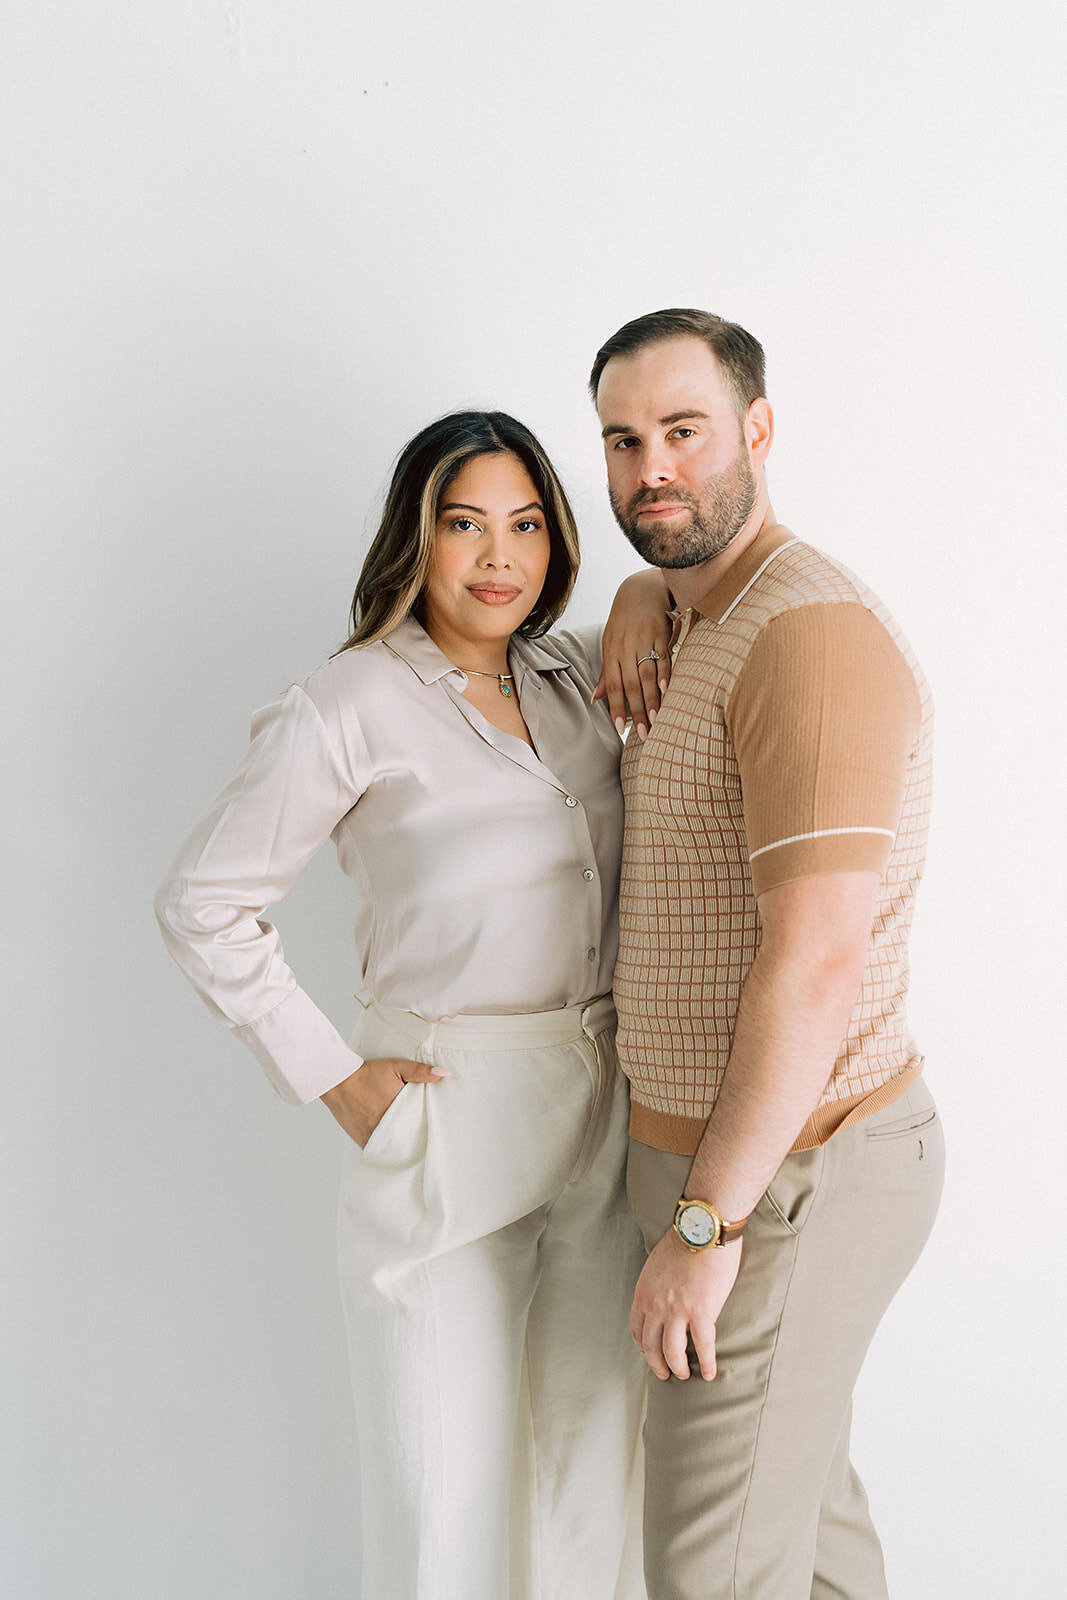 Engagement photo of a stylish couple posing together against a white wall at the Lumen Room in Austin